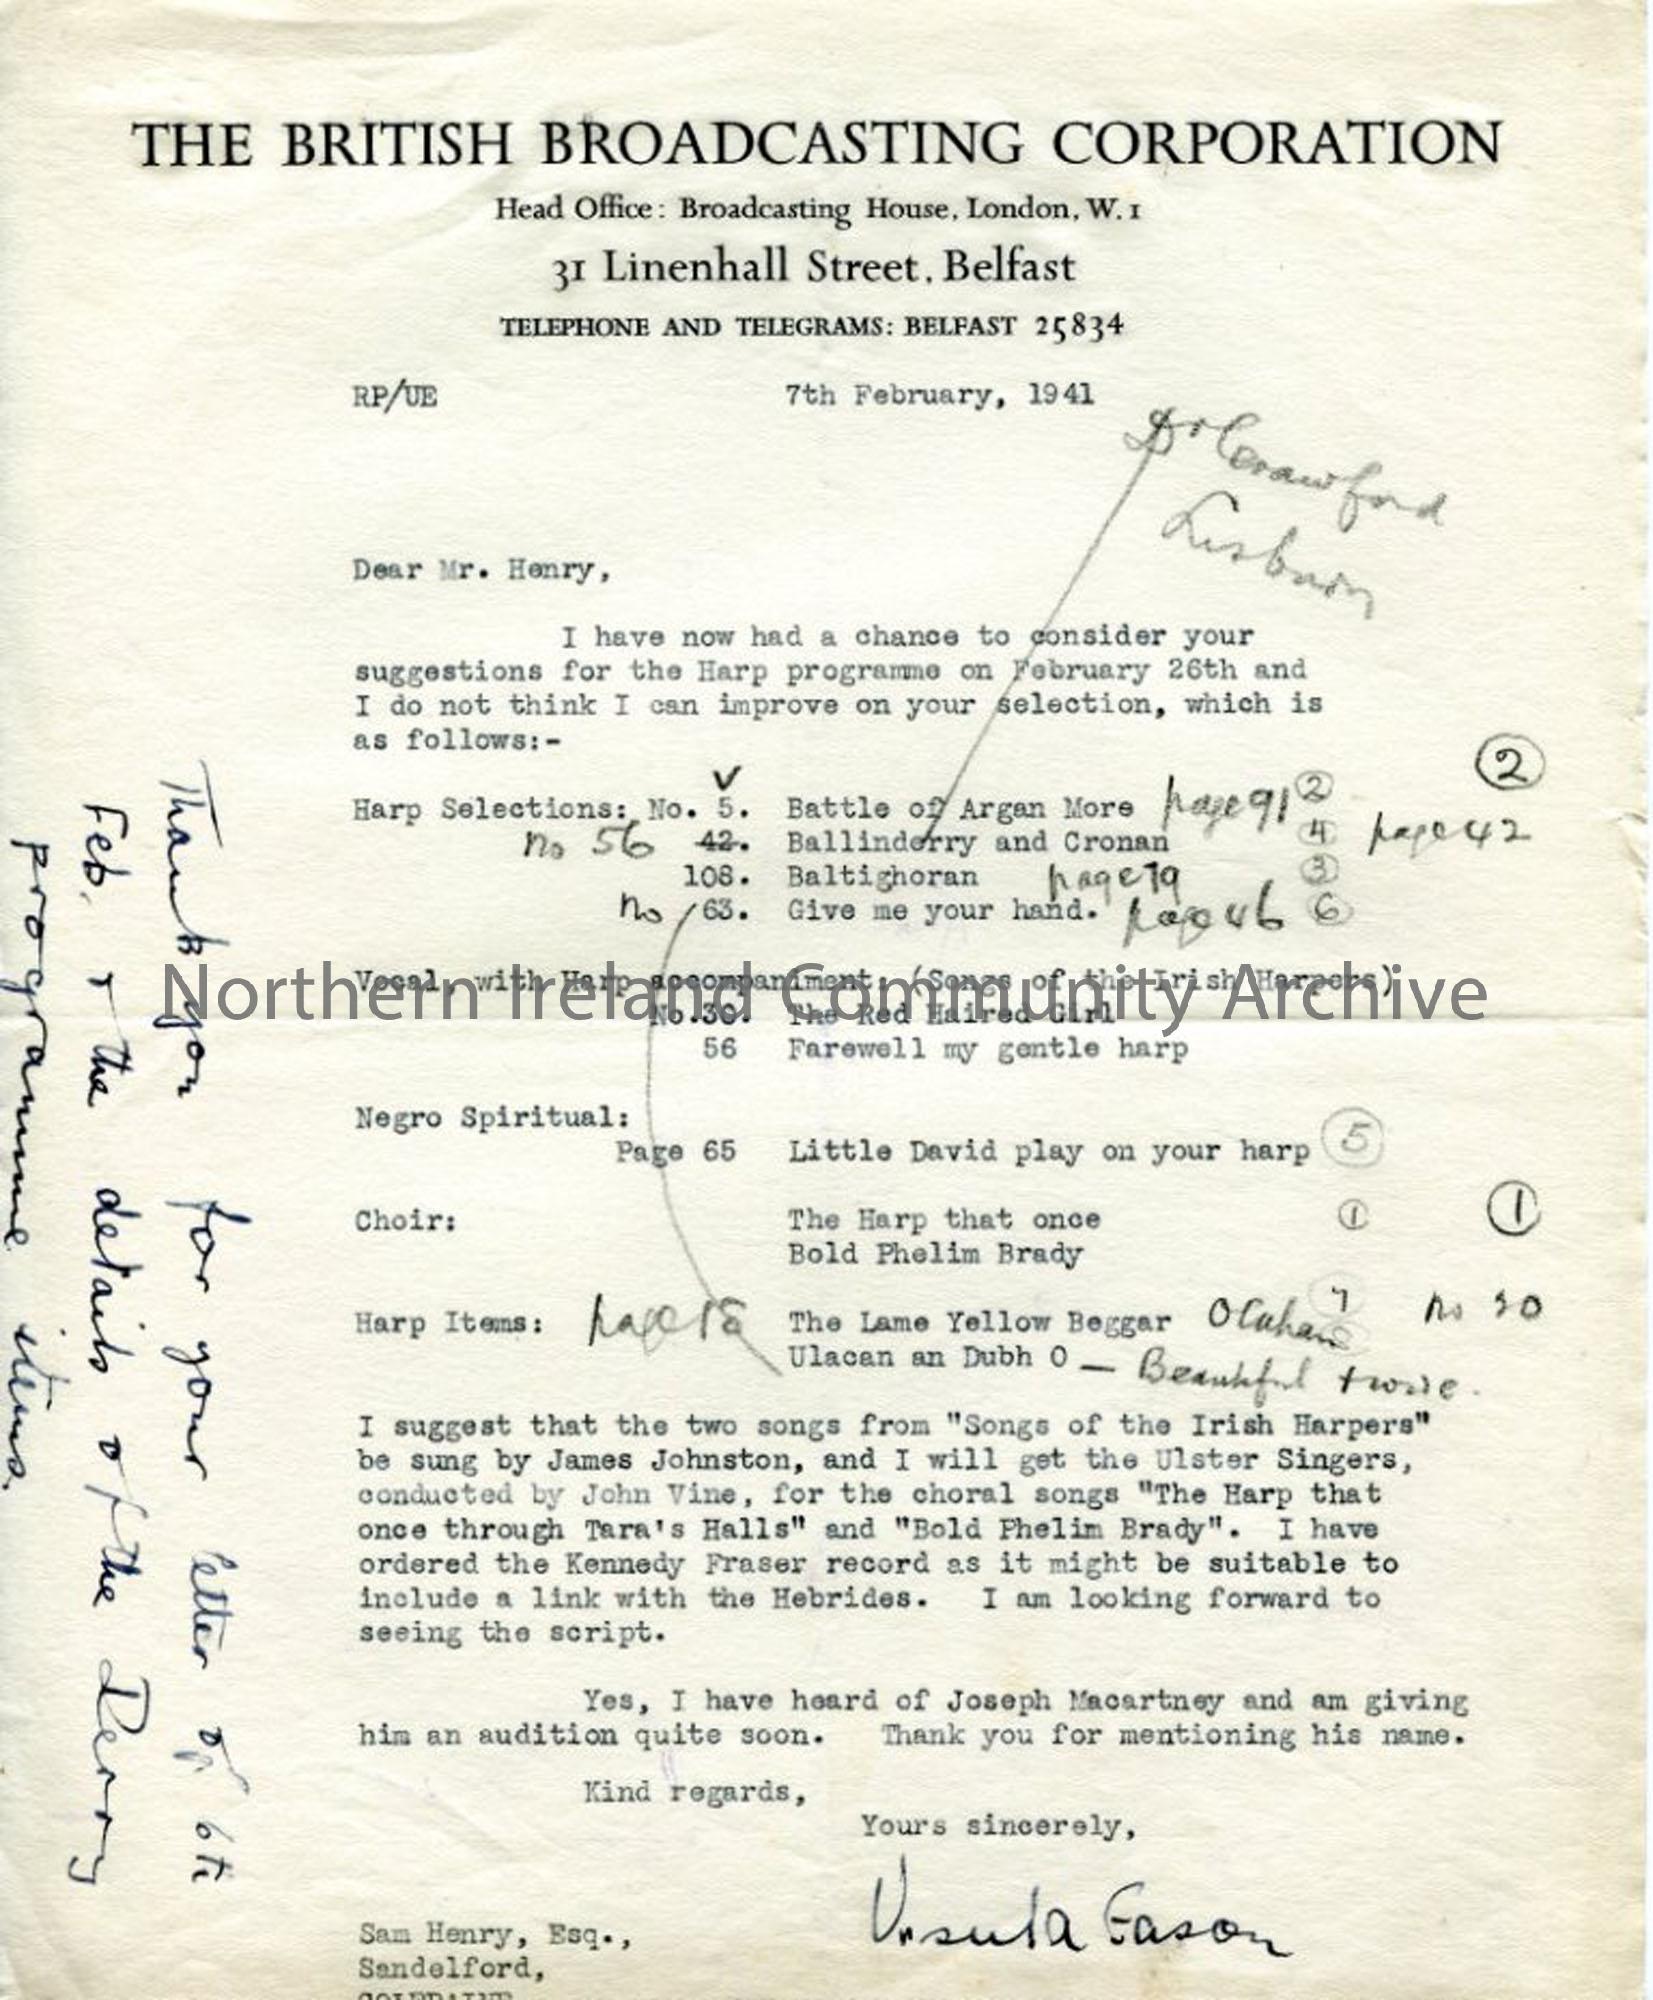 Letter from Ursula Eason of the BBC, 7.2.1941